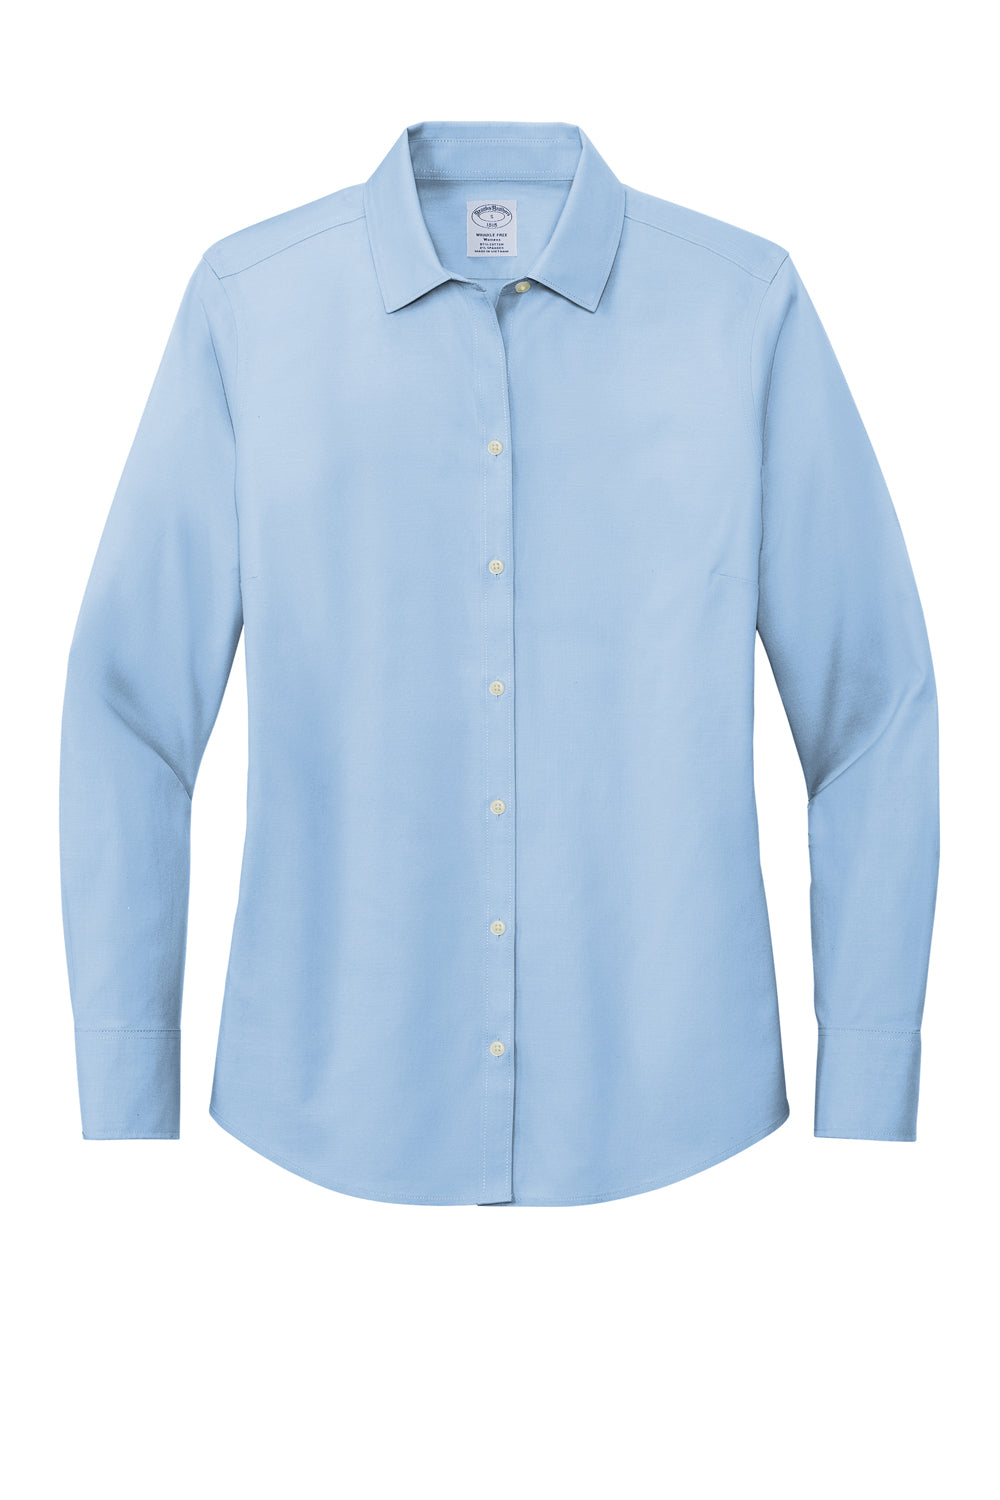 Brooks Brothers Womens Wrinkle Resistant Pinpoint Long Sleeve Button Down Shirt Newport Blue Flat Front